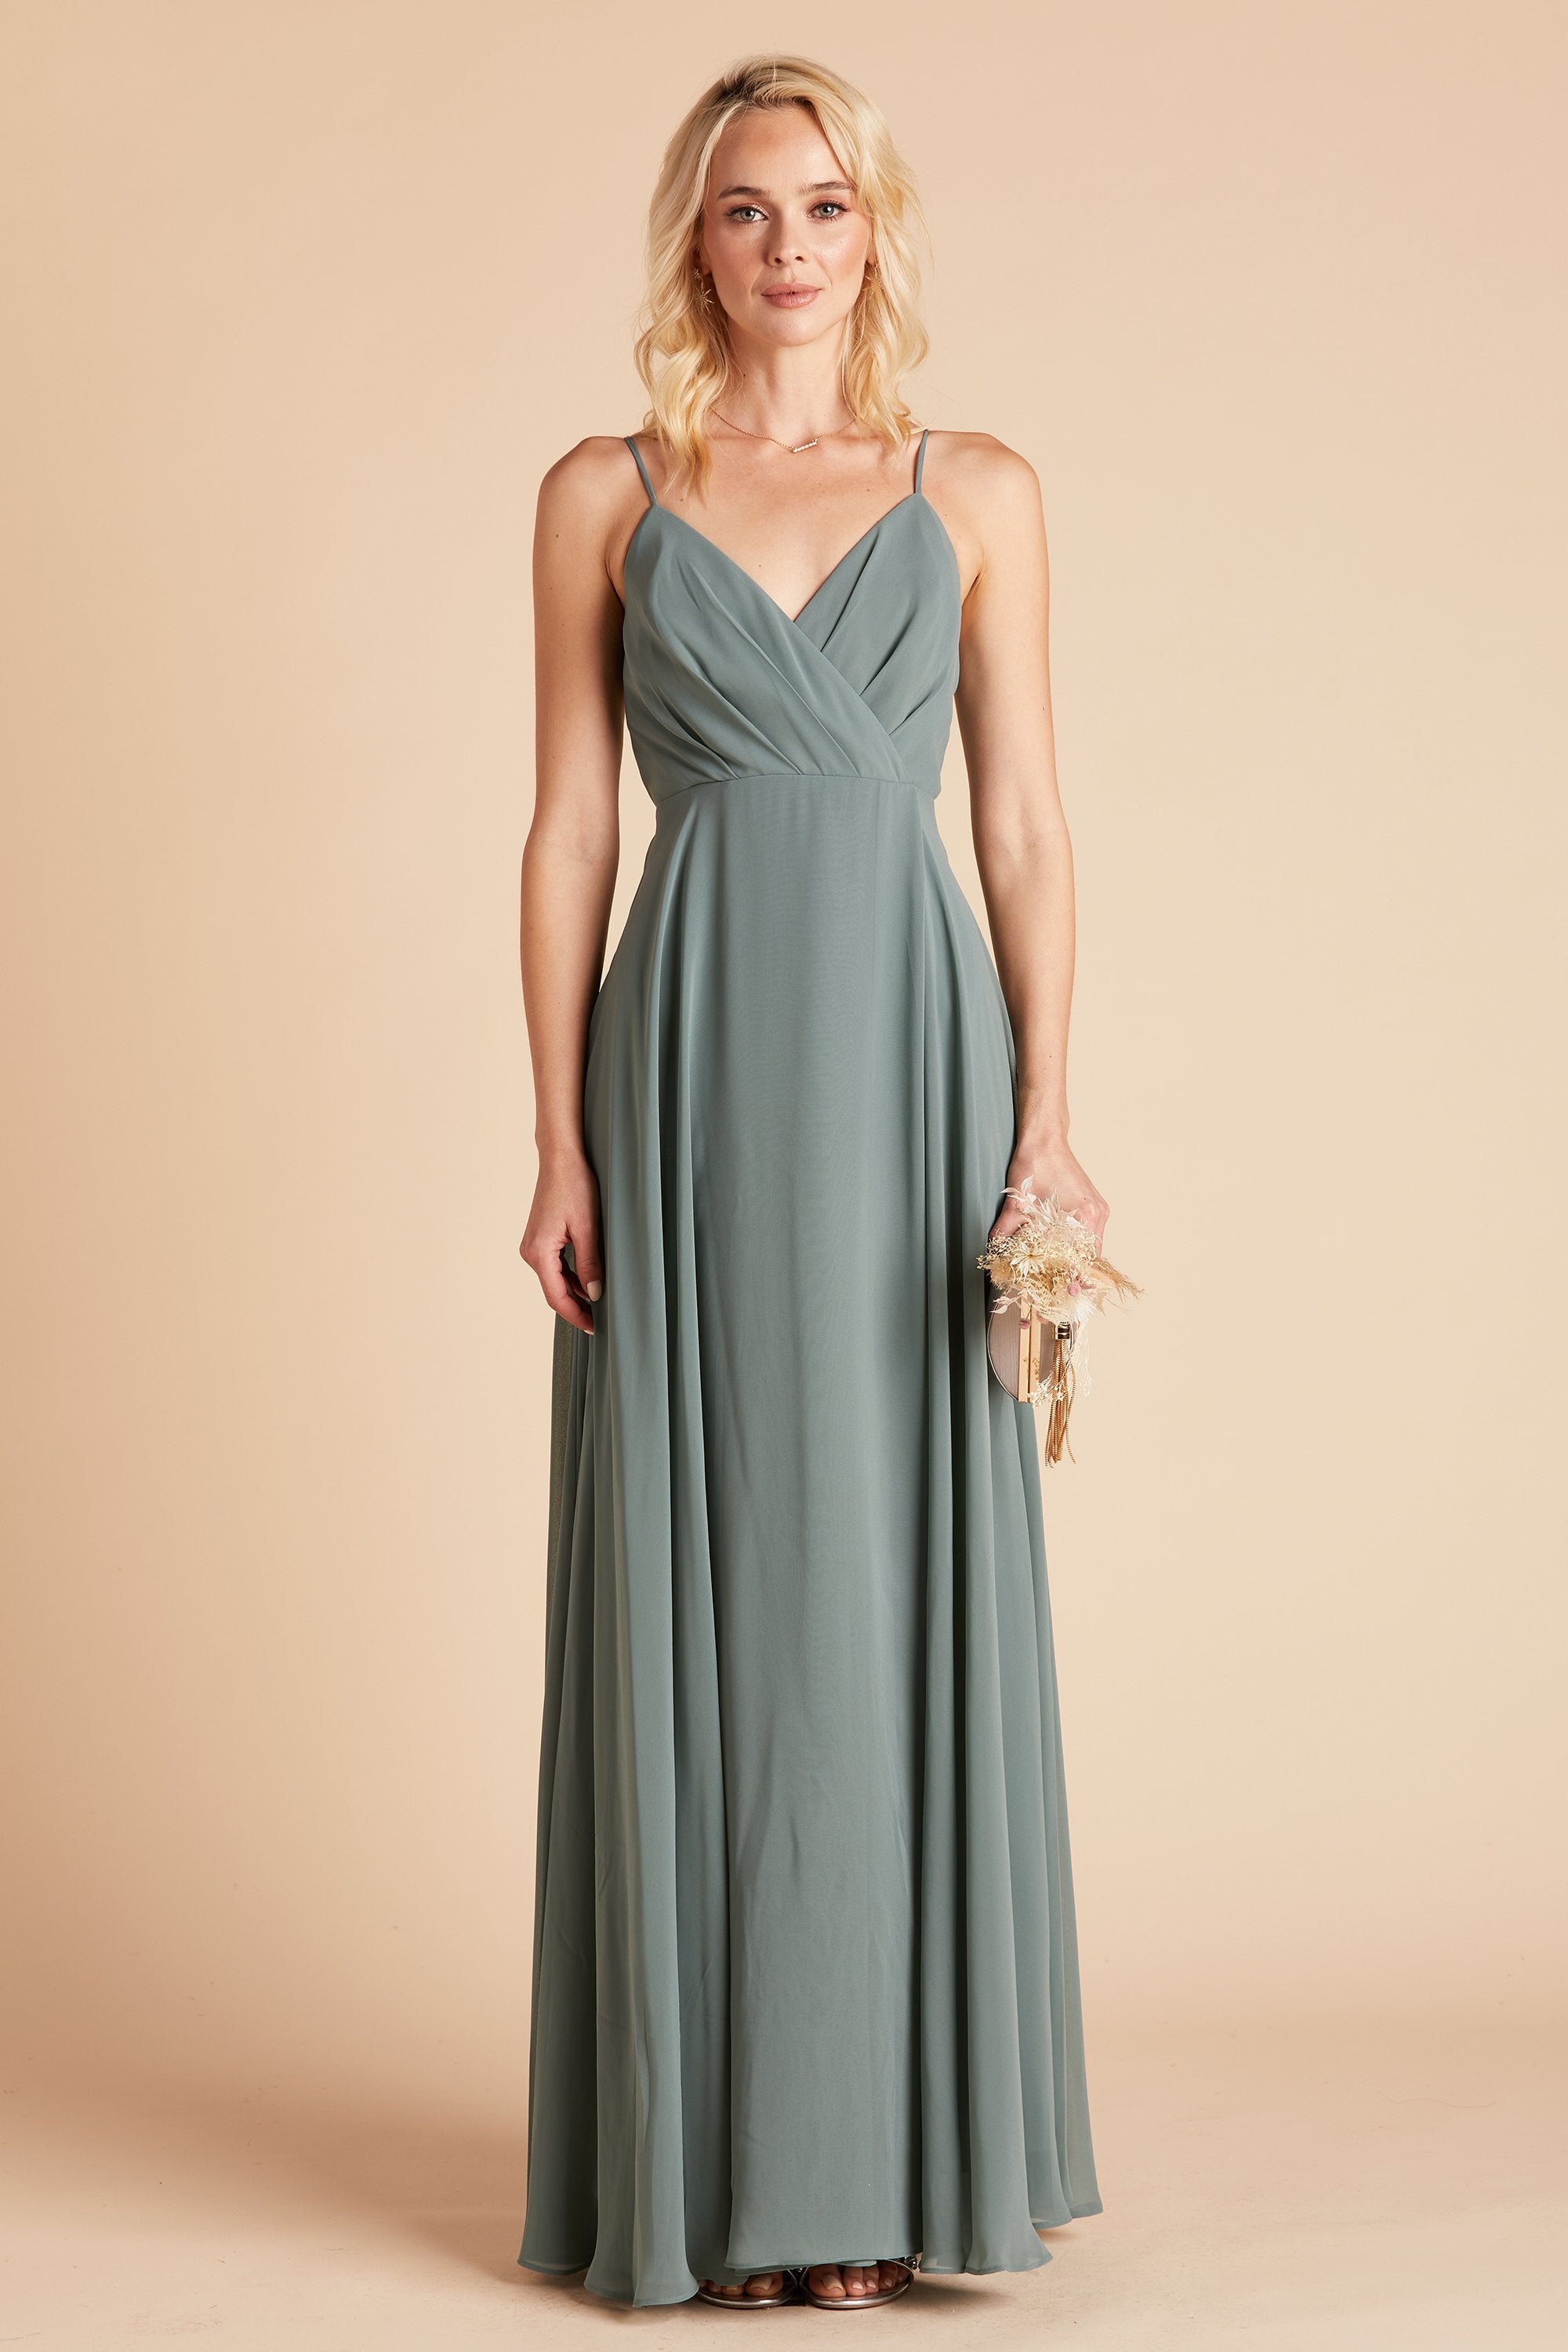 Front view of the Kaia Dress in sea glass chiffon shows the model holding a bouquet and pale pink clutch at their side. The V-neck and wide pleated bodice overlaps across the chest. The skirt front falls smoothly towards the floor, gathering gently at the sides.